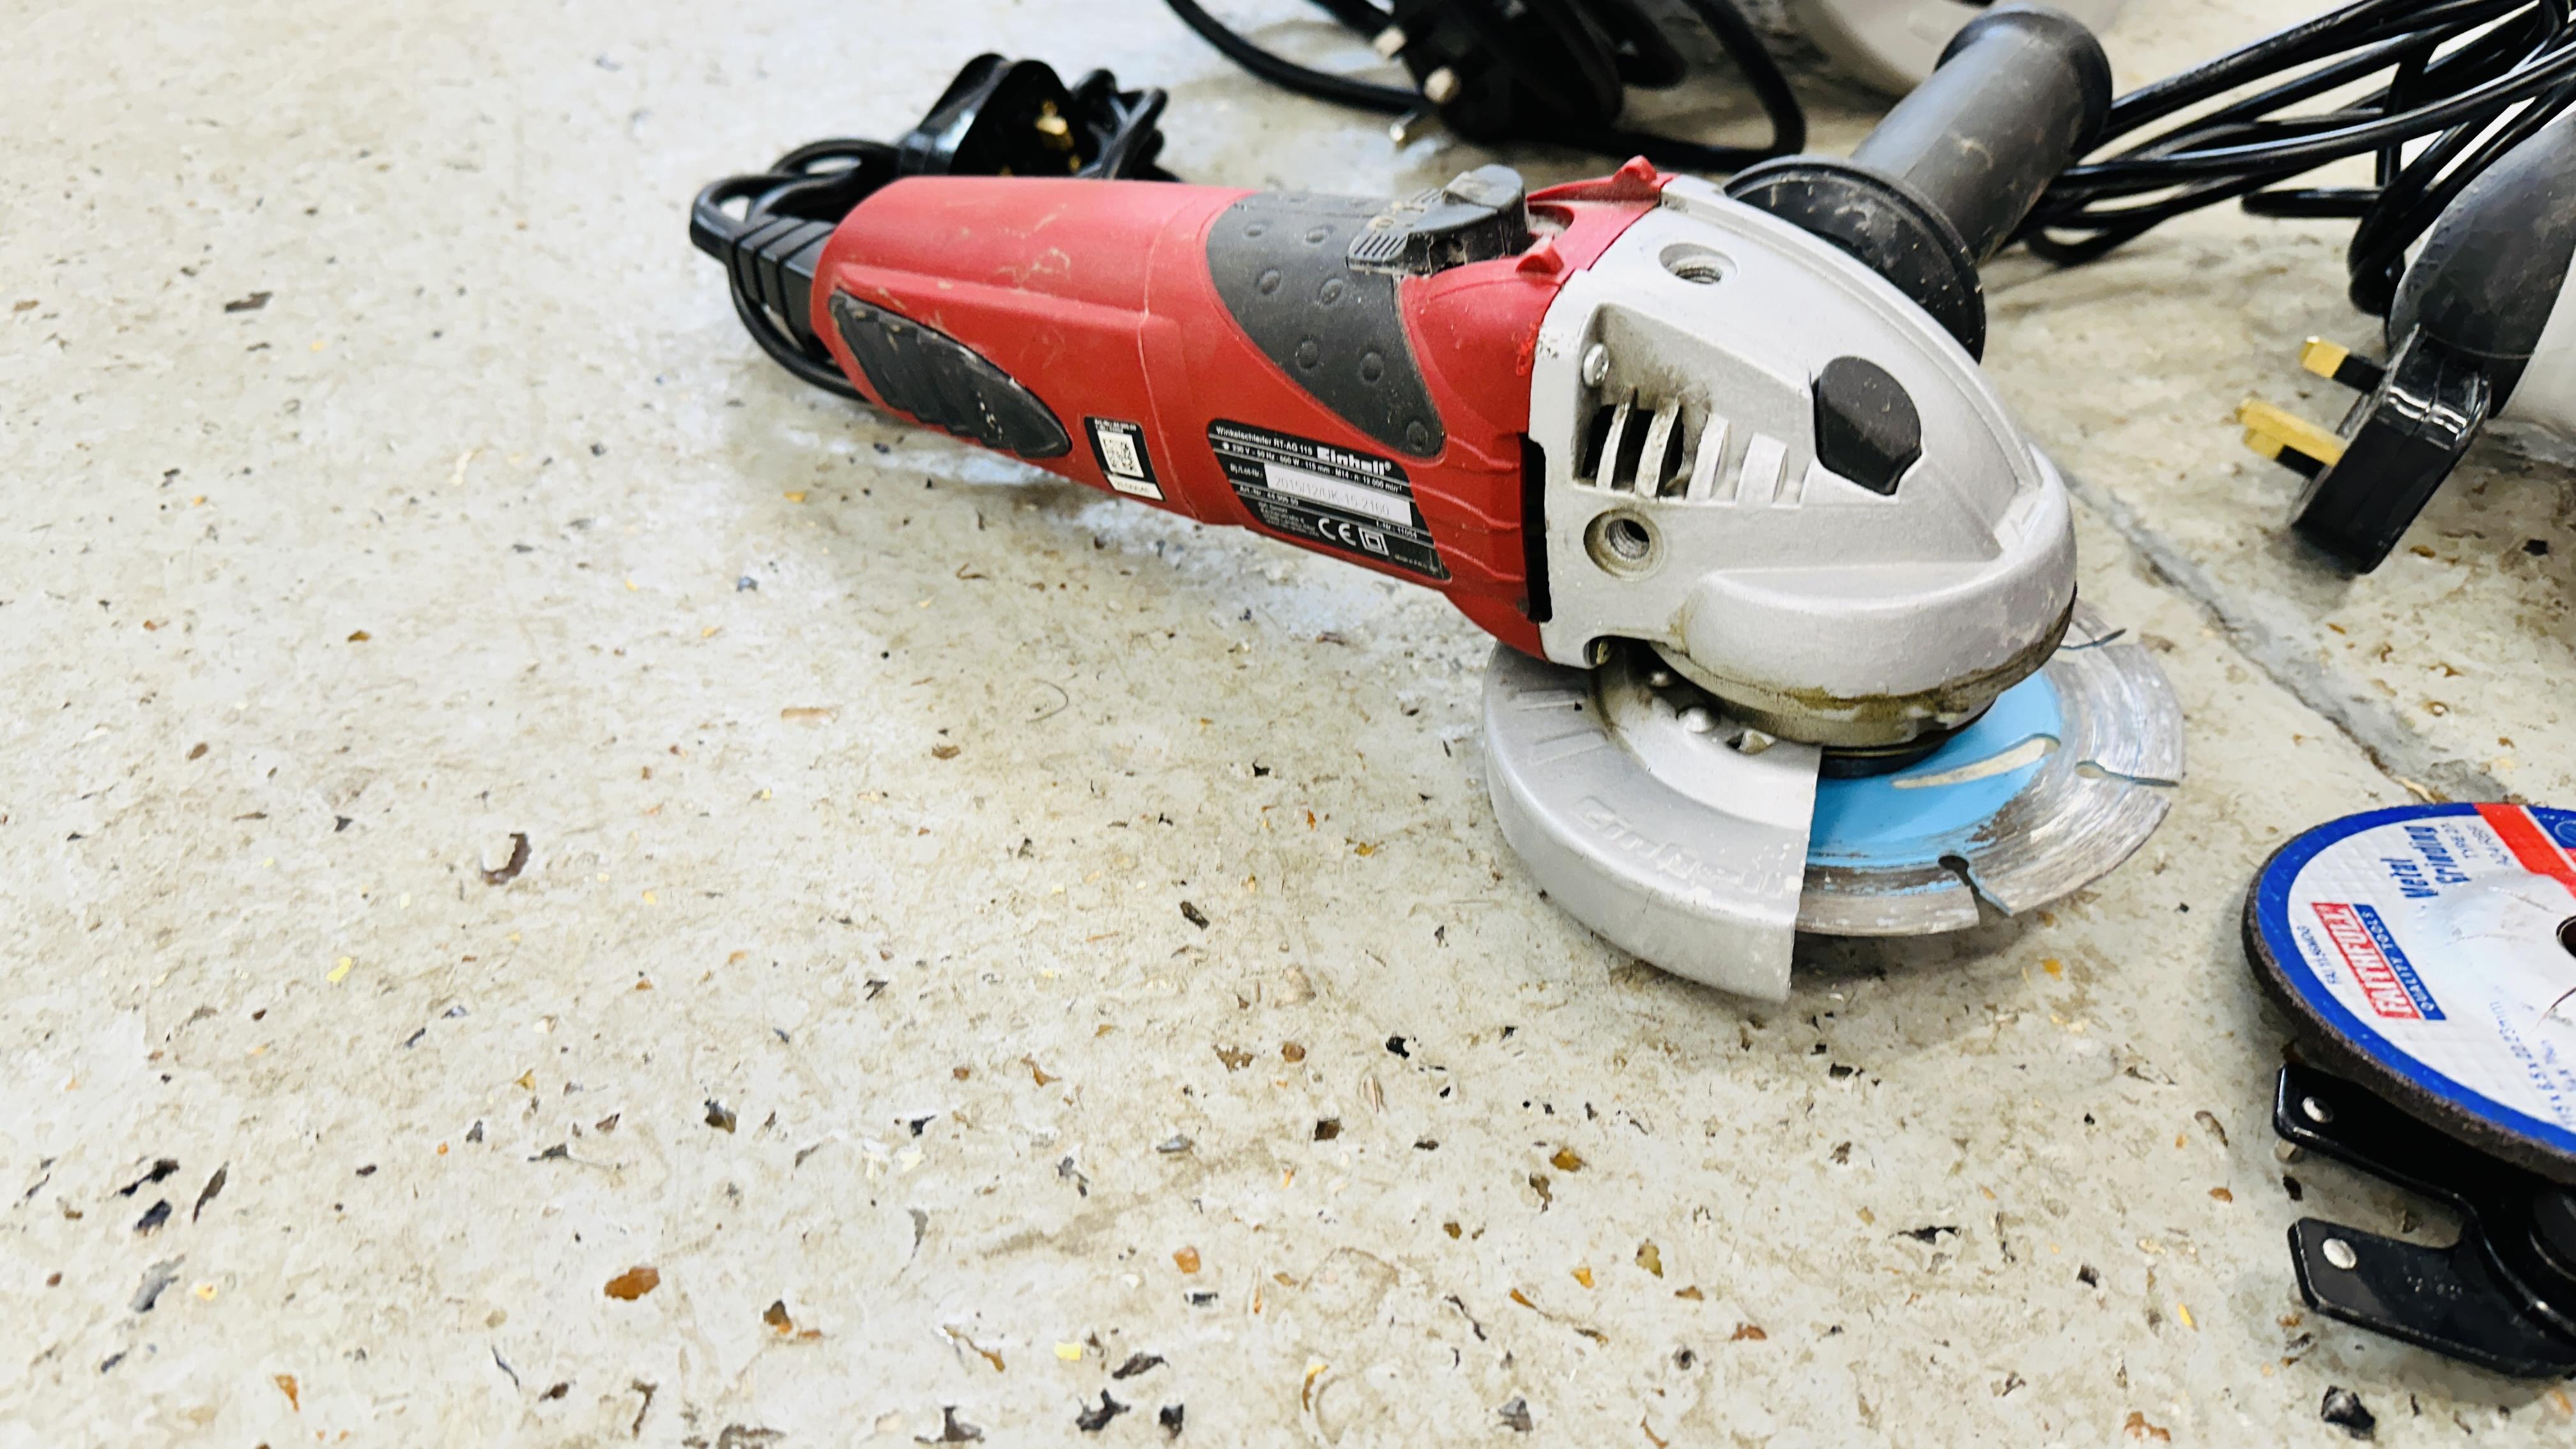 BOSCH GKS 190 CIRCULAR SAW ALONG WITH EINHELL 4 INCH GRINDER AND MACALLISTER MSCS110 SANDER - SOLD - Image 5 of 5